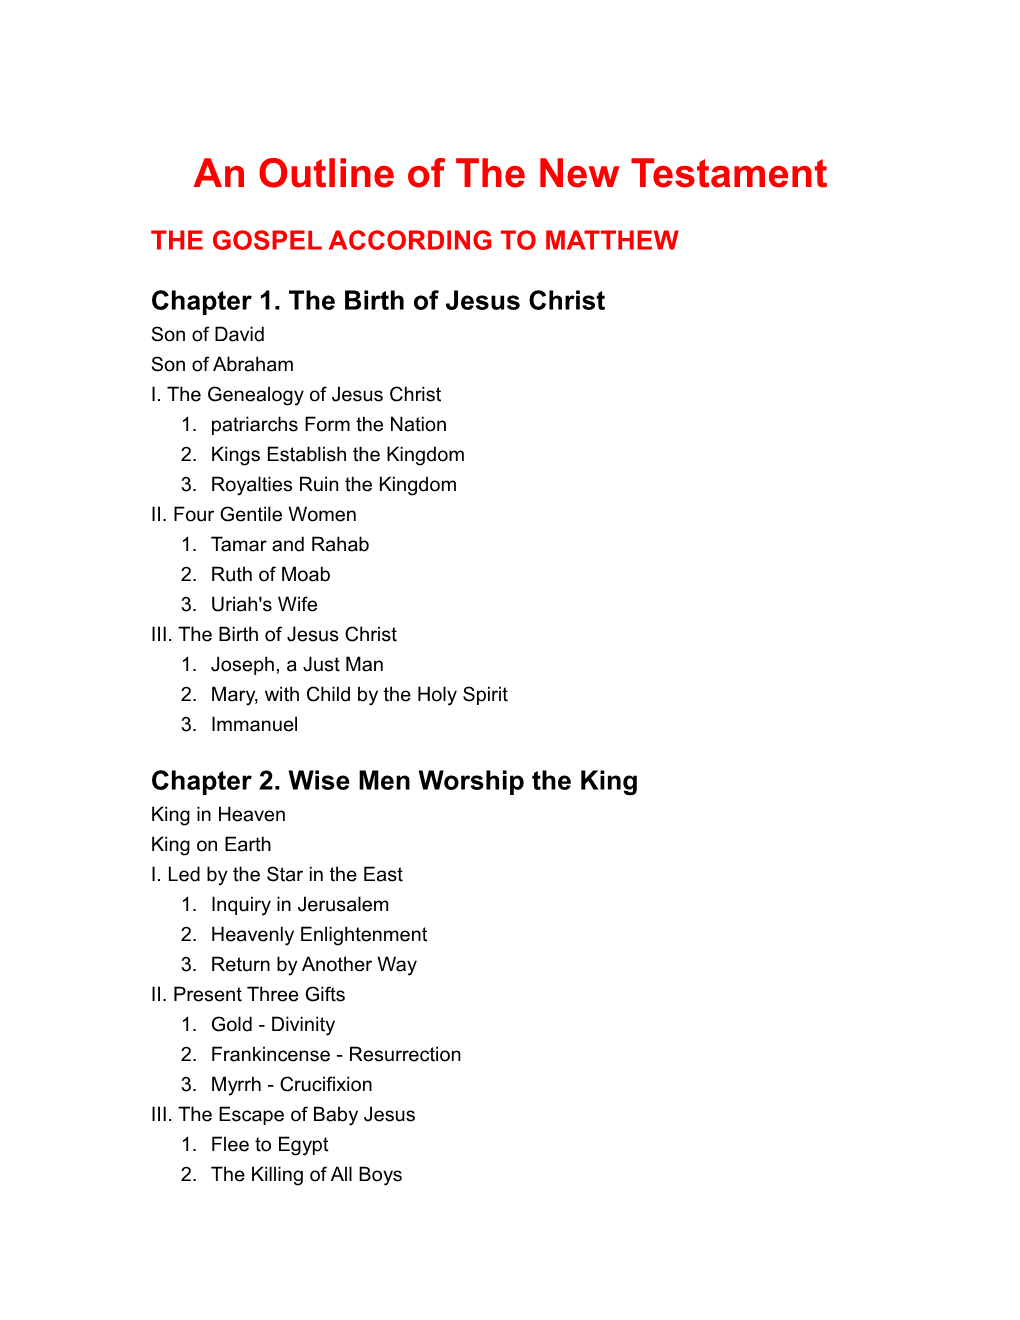 An Outline of the New Testament